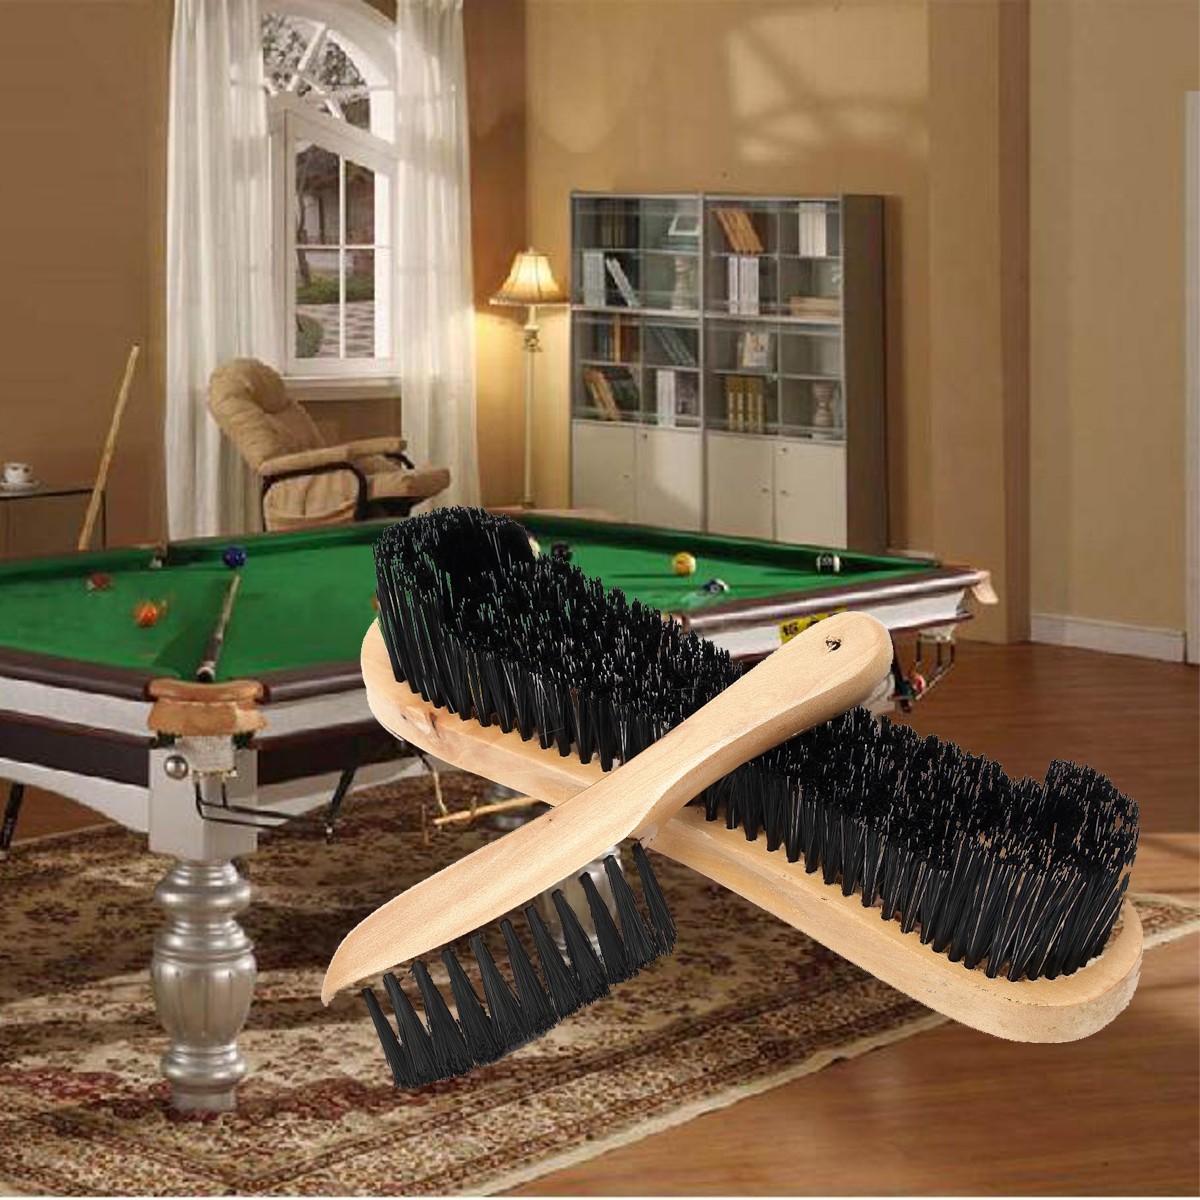 

2PCS Wooden Cleaning Rail Felt Brush For Cue Sport Billiards Snooker Table